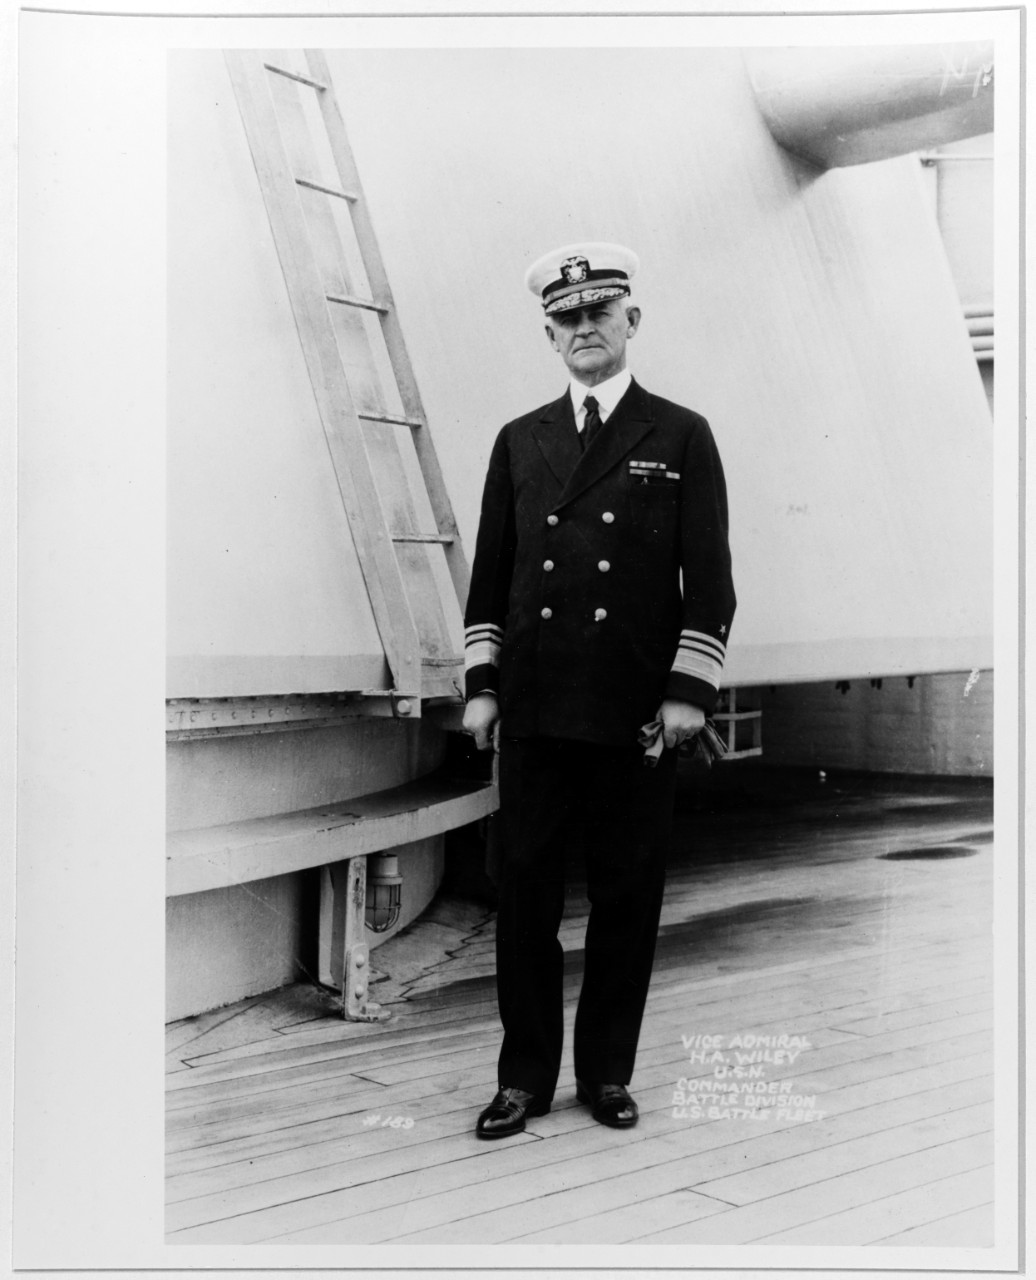 Vice Admiral H. A. Wiley, USN